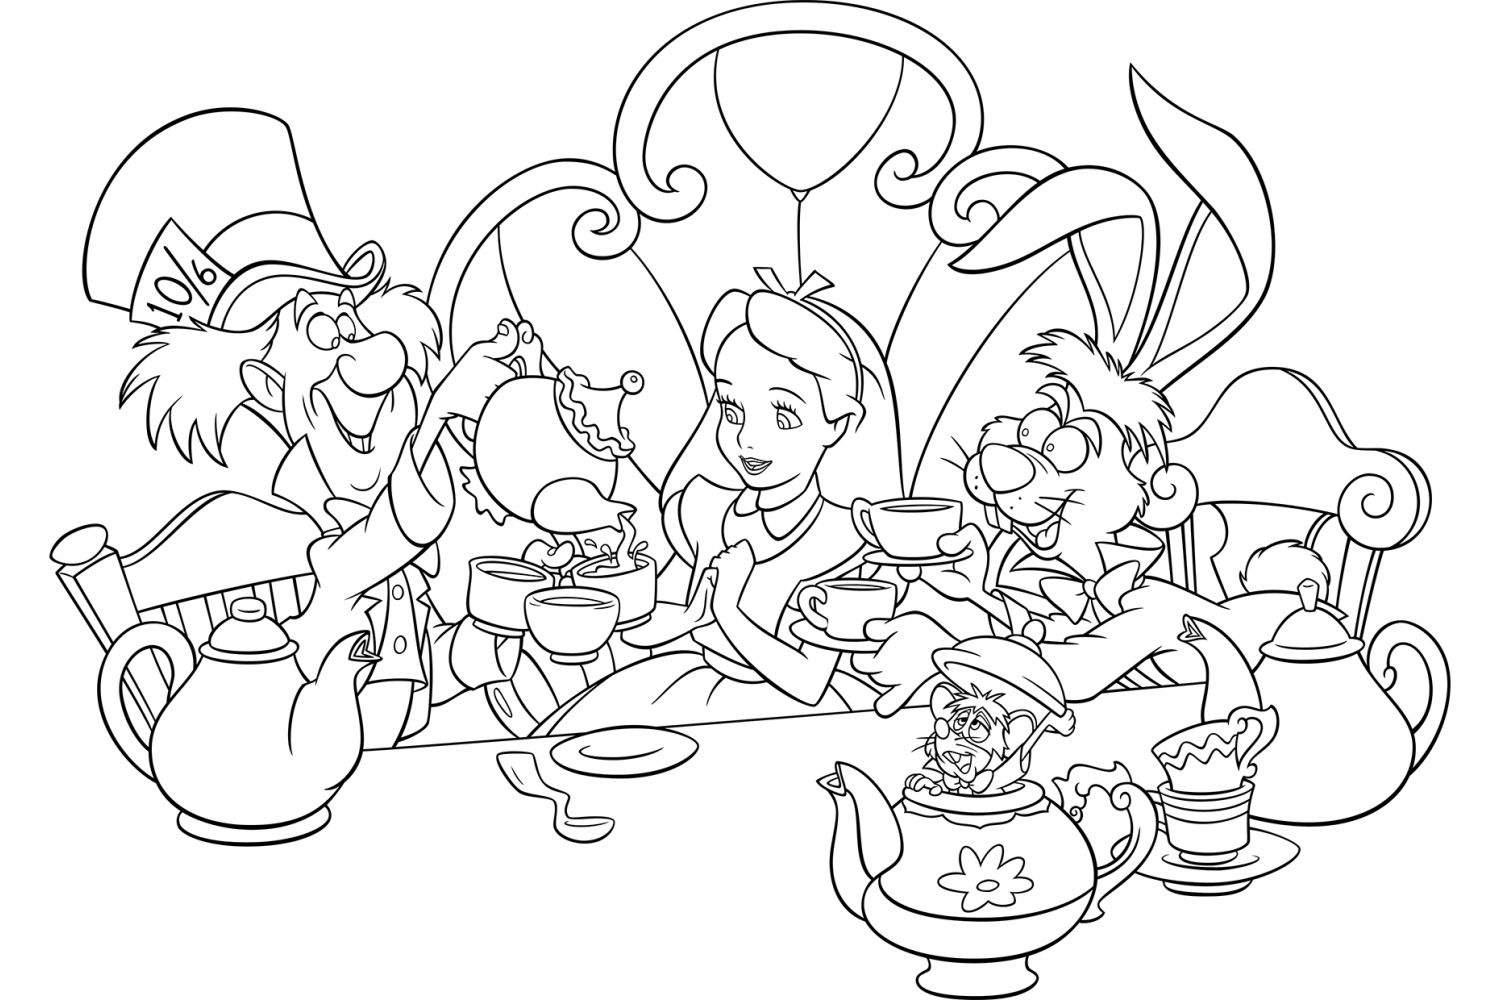 Alice in Wonderland – Coloring Pages for print